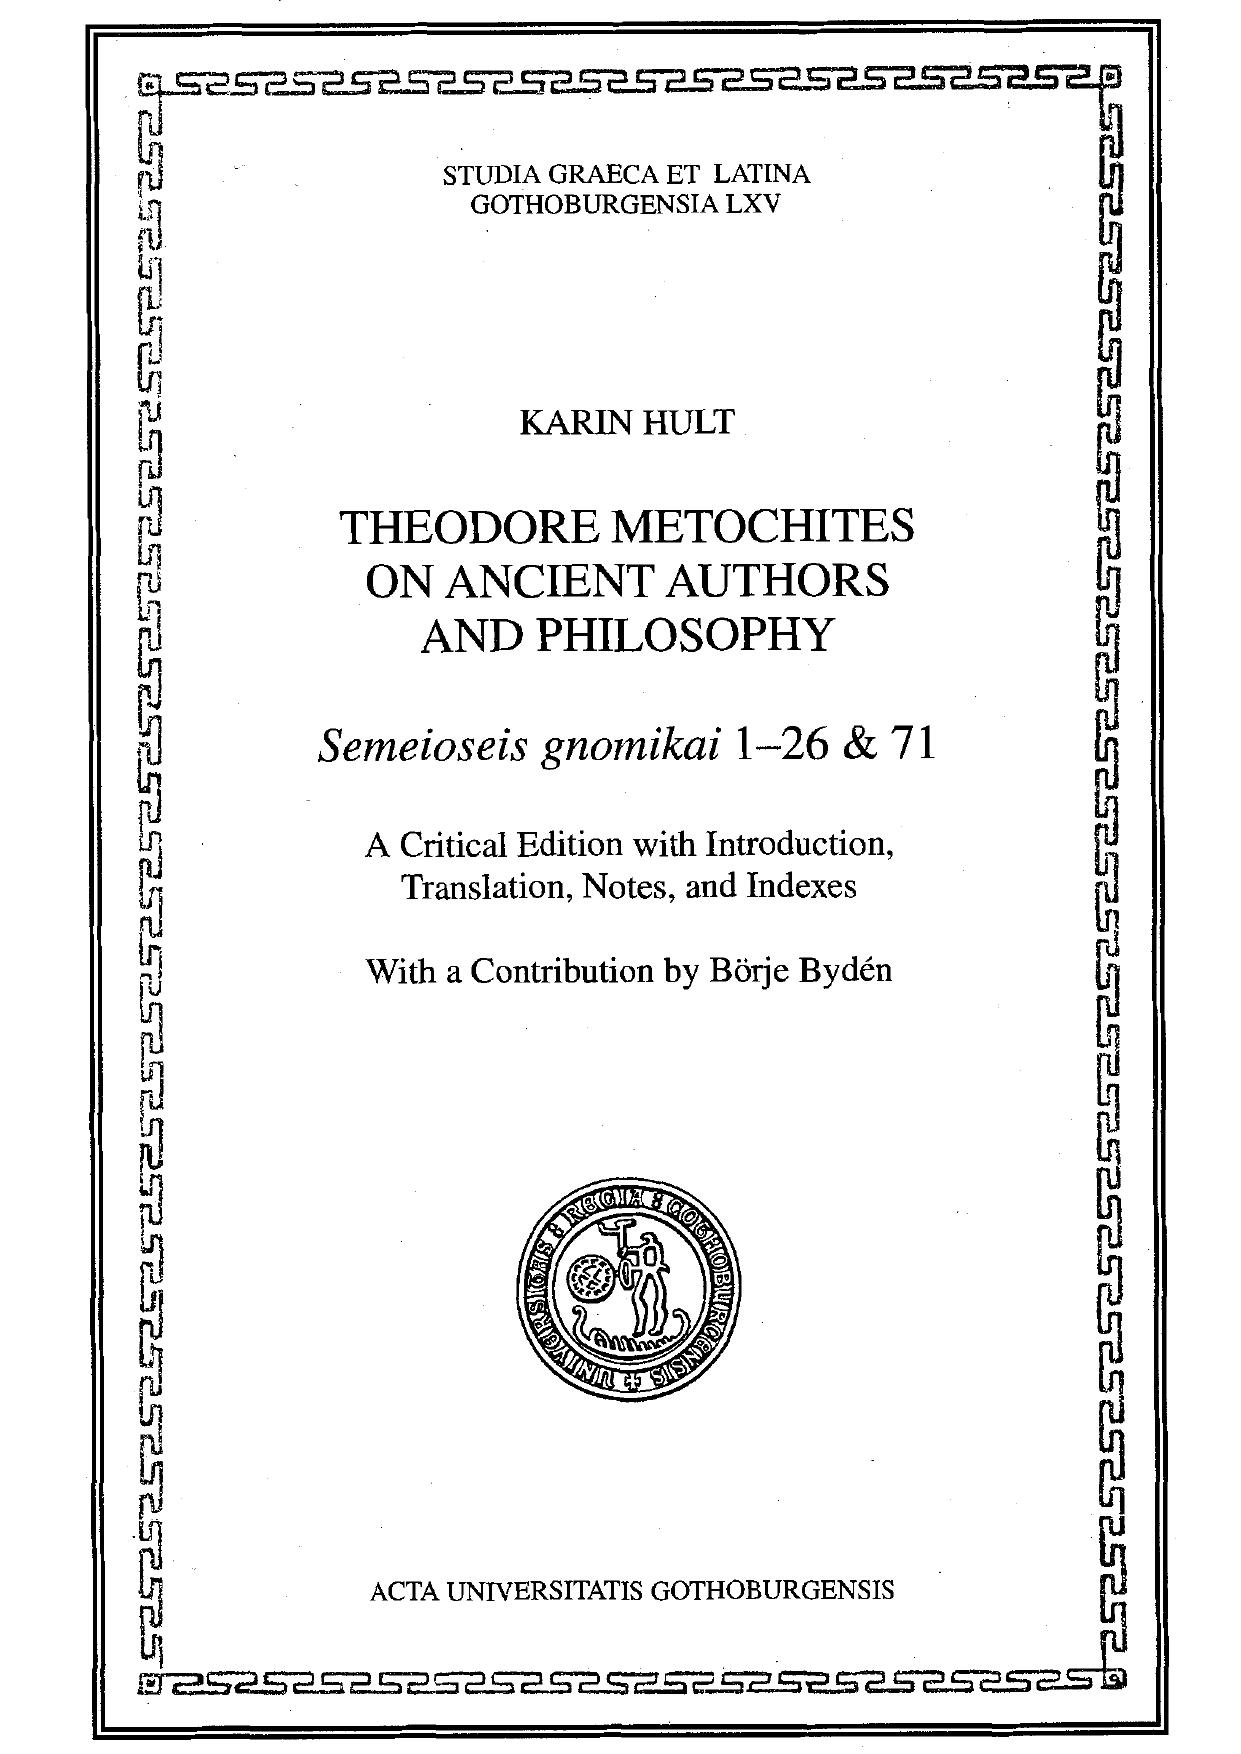 Theodore Metochites on Ancient Authors and Philosophy: Semeioseis Gnomikai 1-26 & 71: A Critical Edition with Introduction, Translation, Notes, and Indexes by Karin Hult Börje Bydén